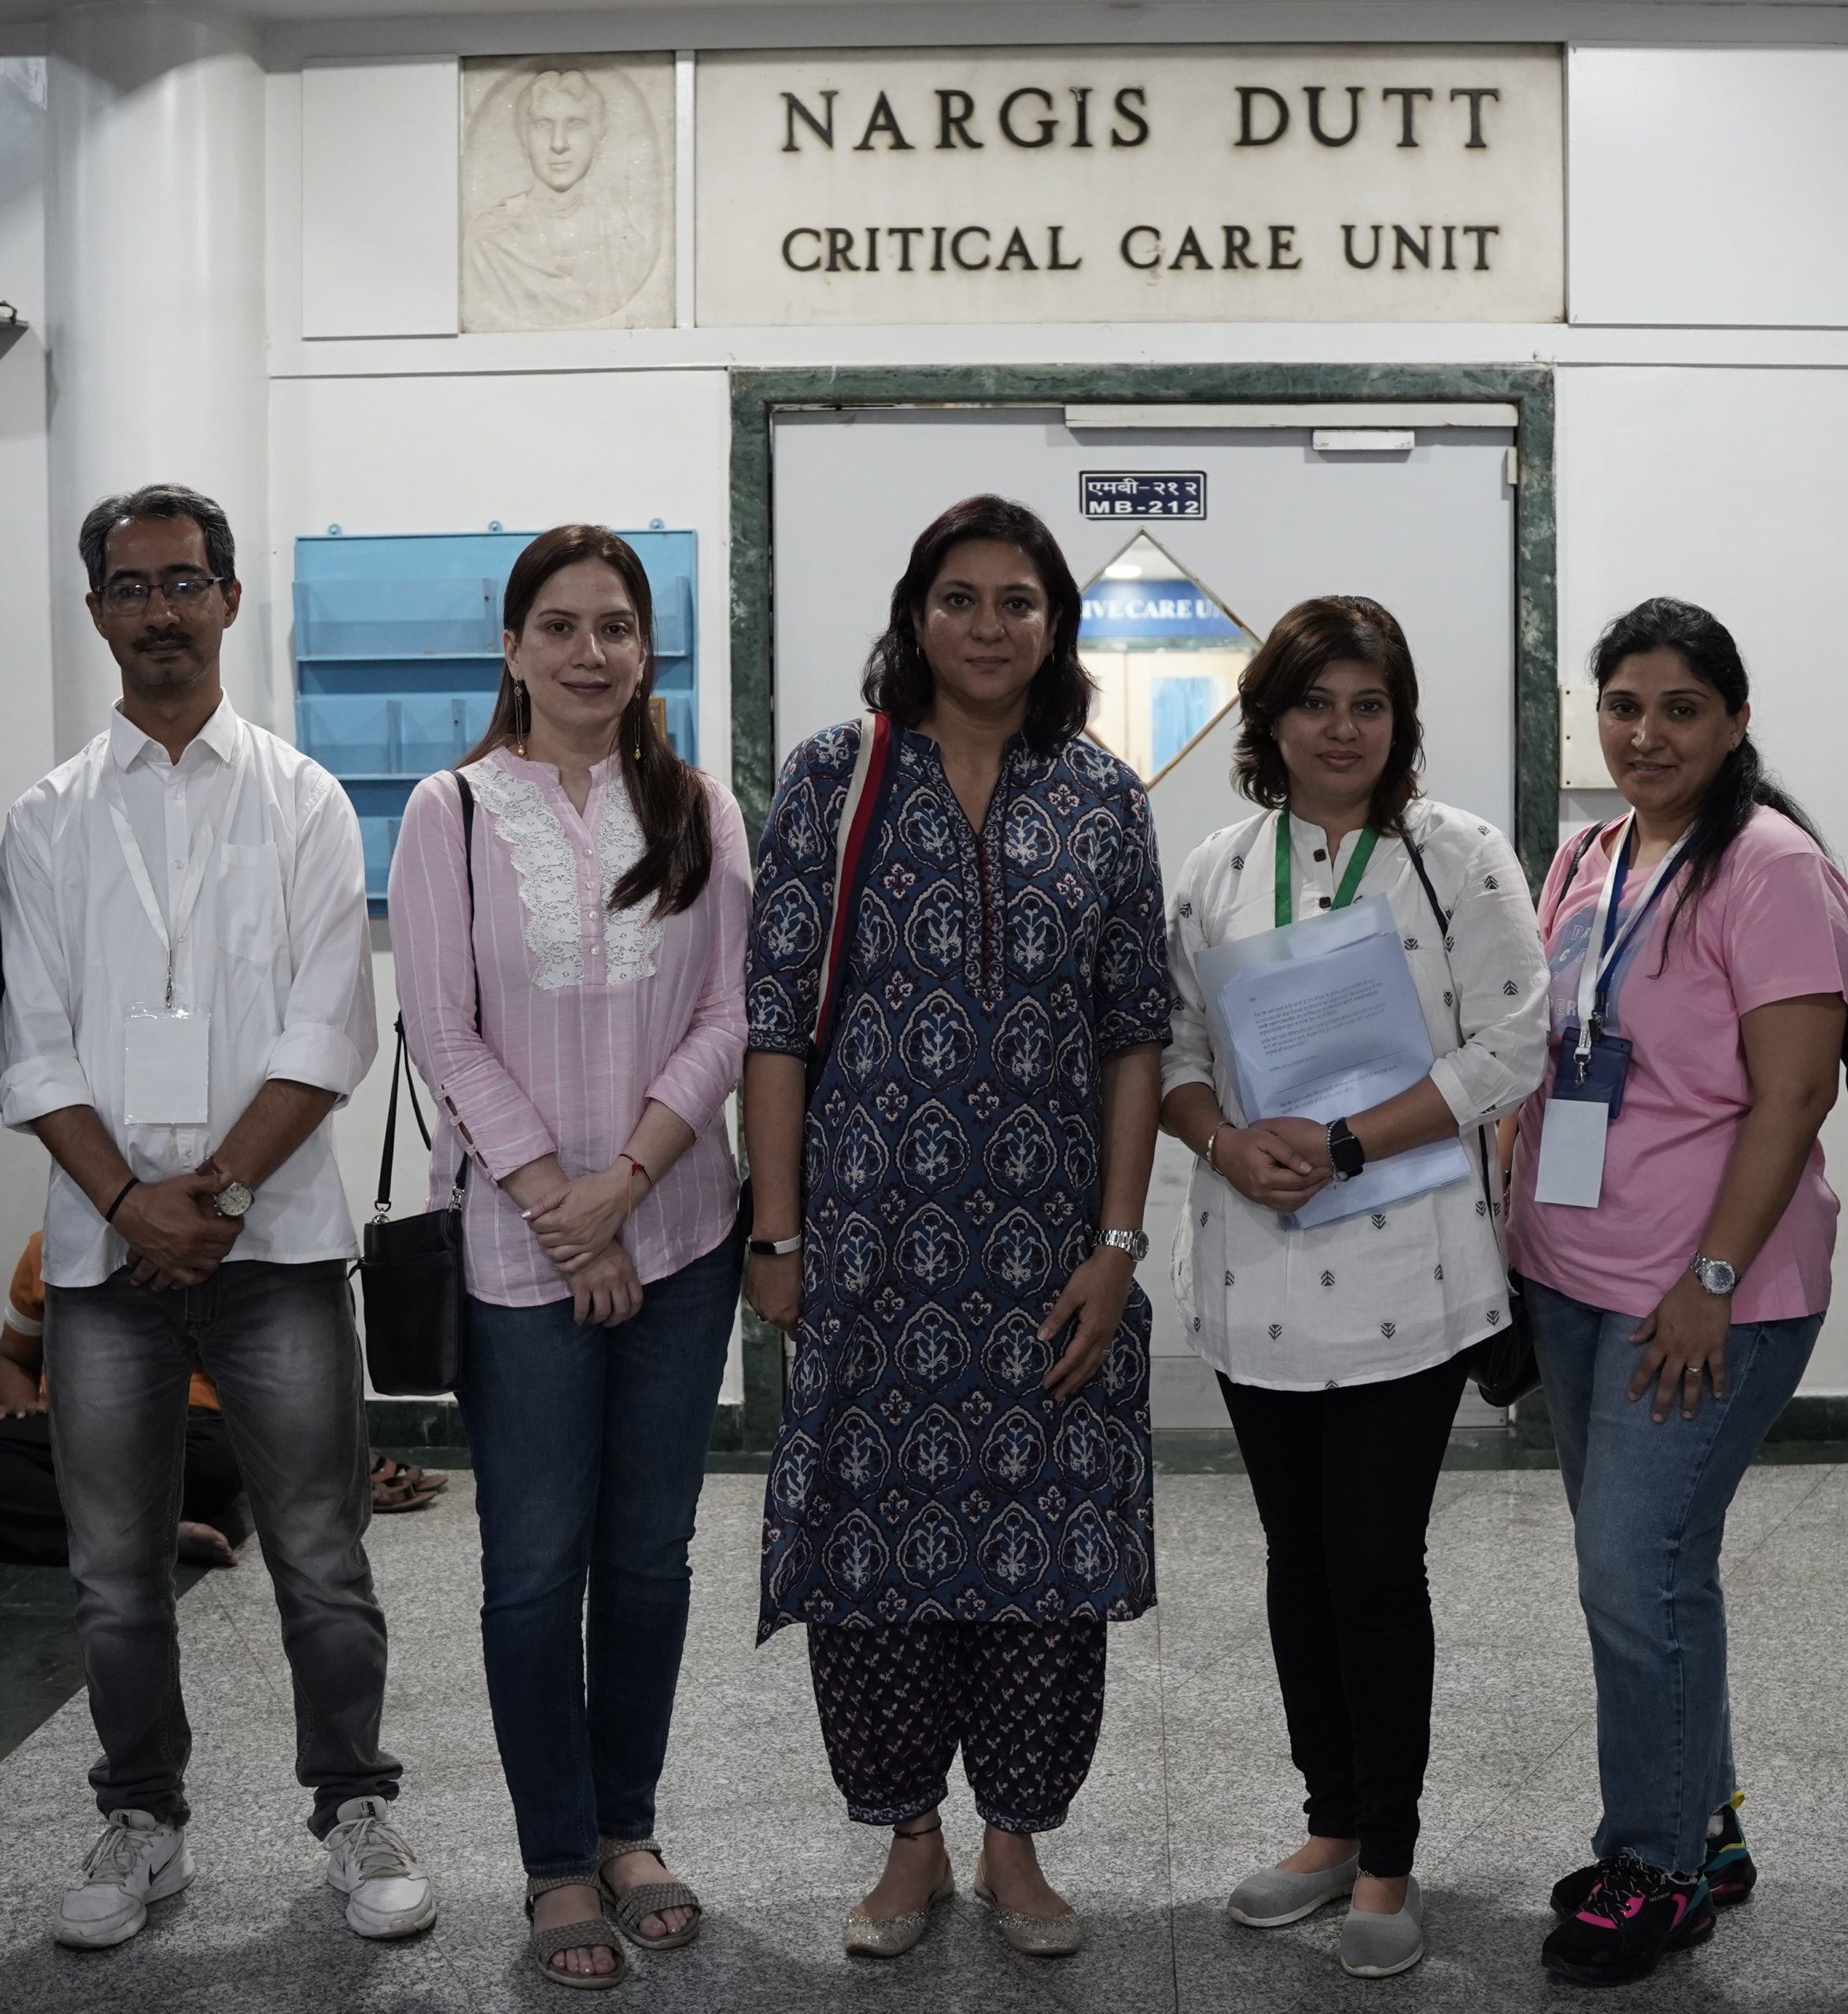 Nargis Dutt Foundation has been playing a vital role in taking care of underprivileged cancer patients